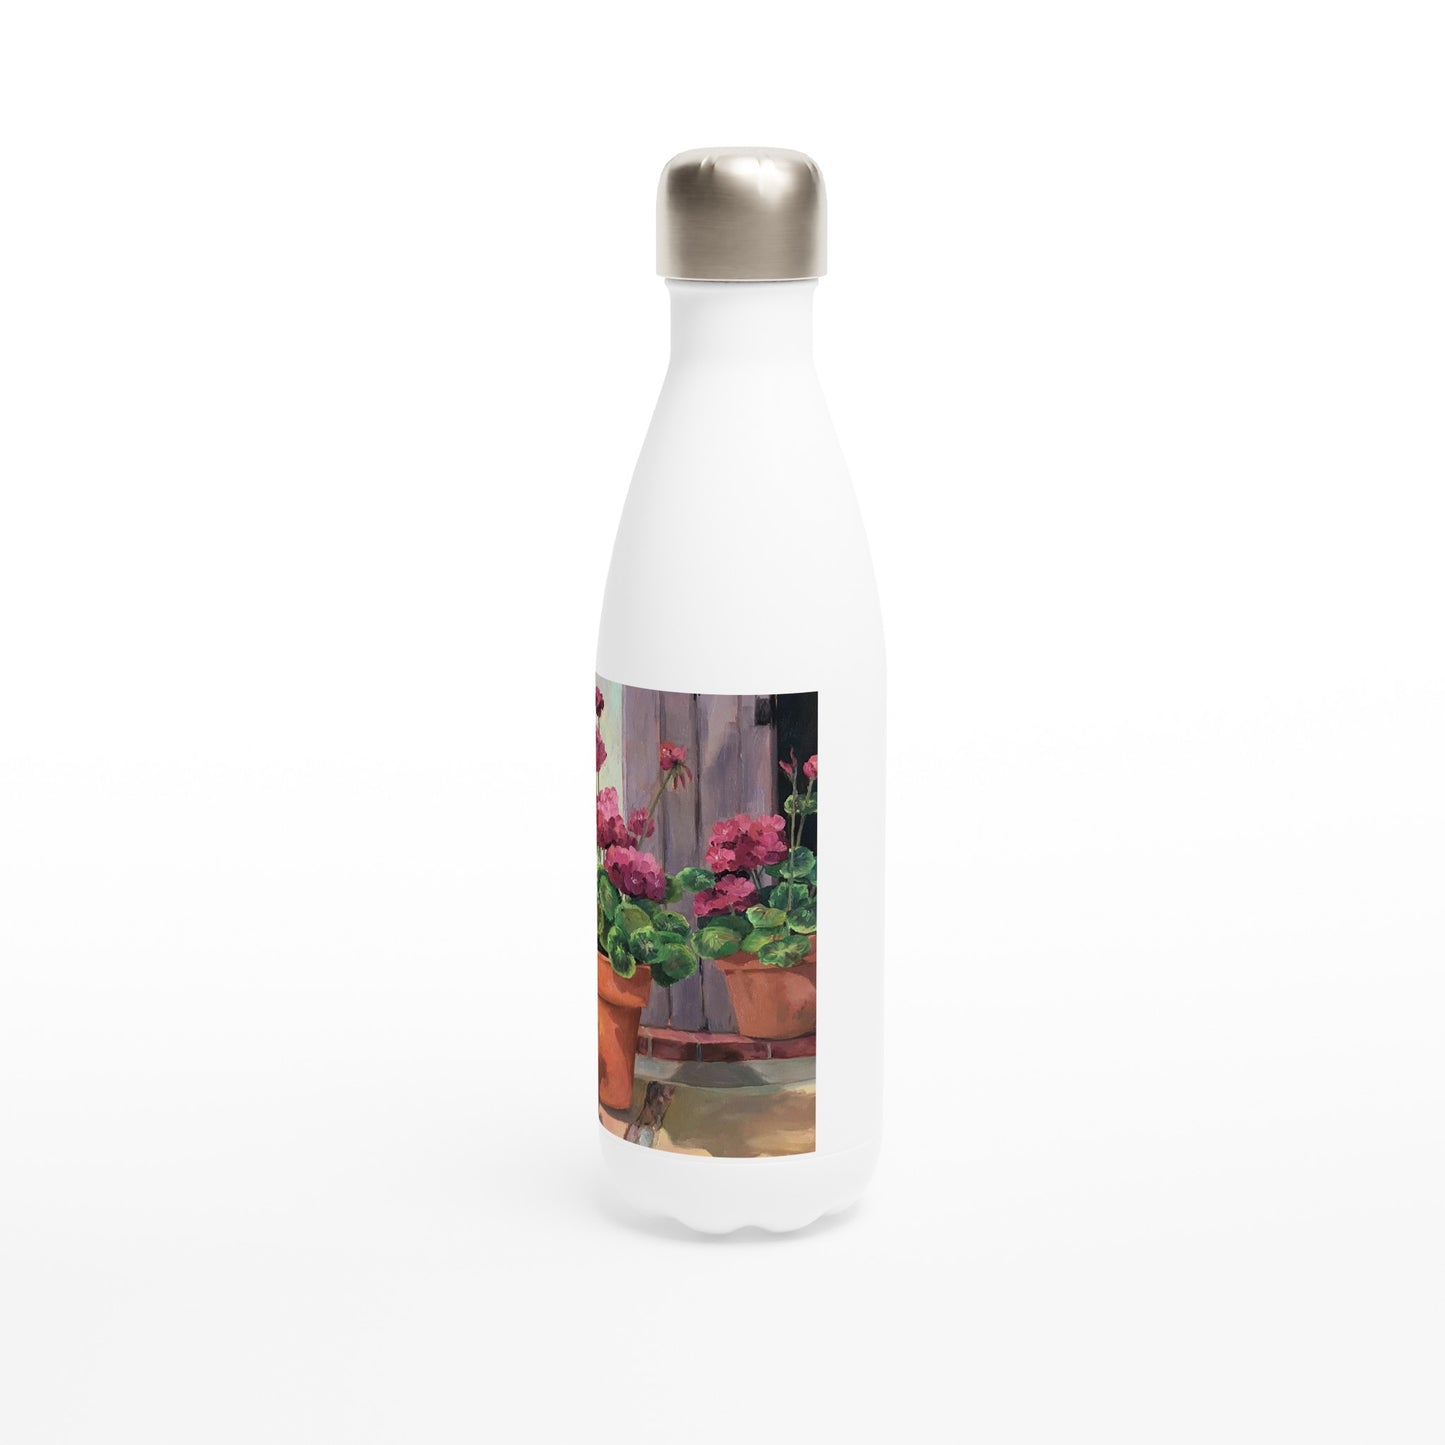 "Geraniums 2" White 17oz Stainless Steel Water Bottle by Barbara Cleary Designs